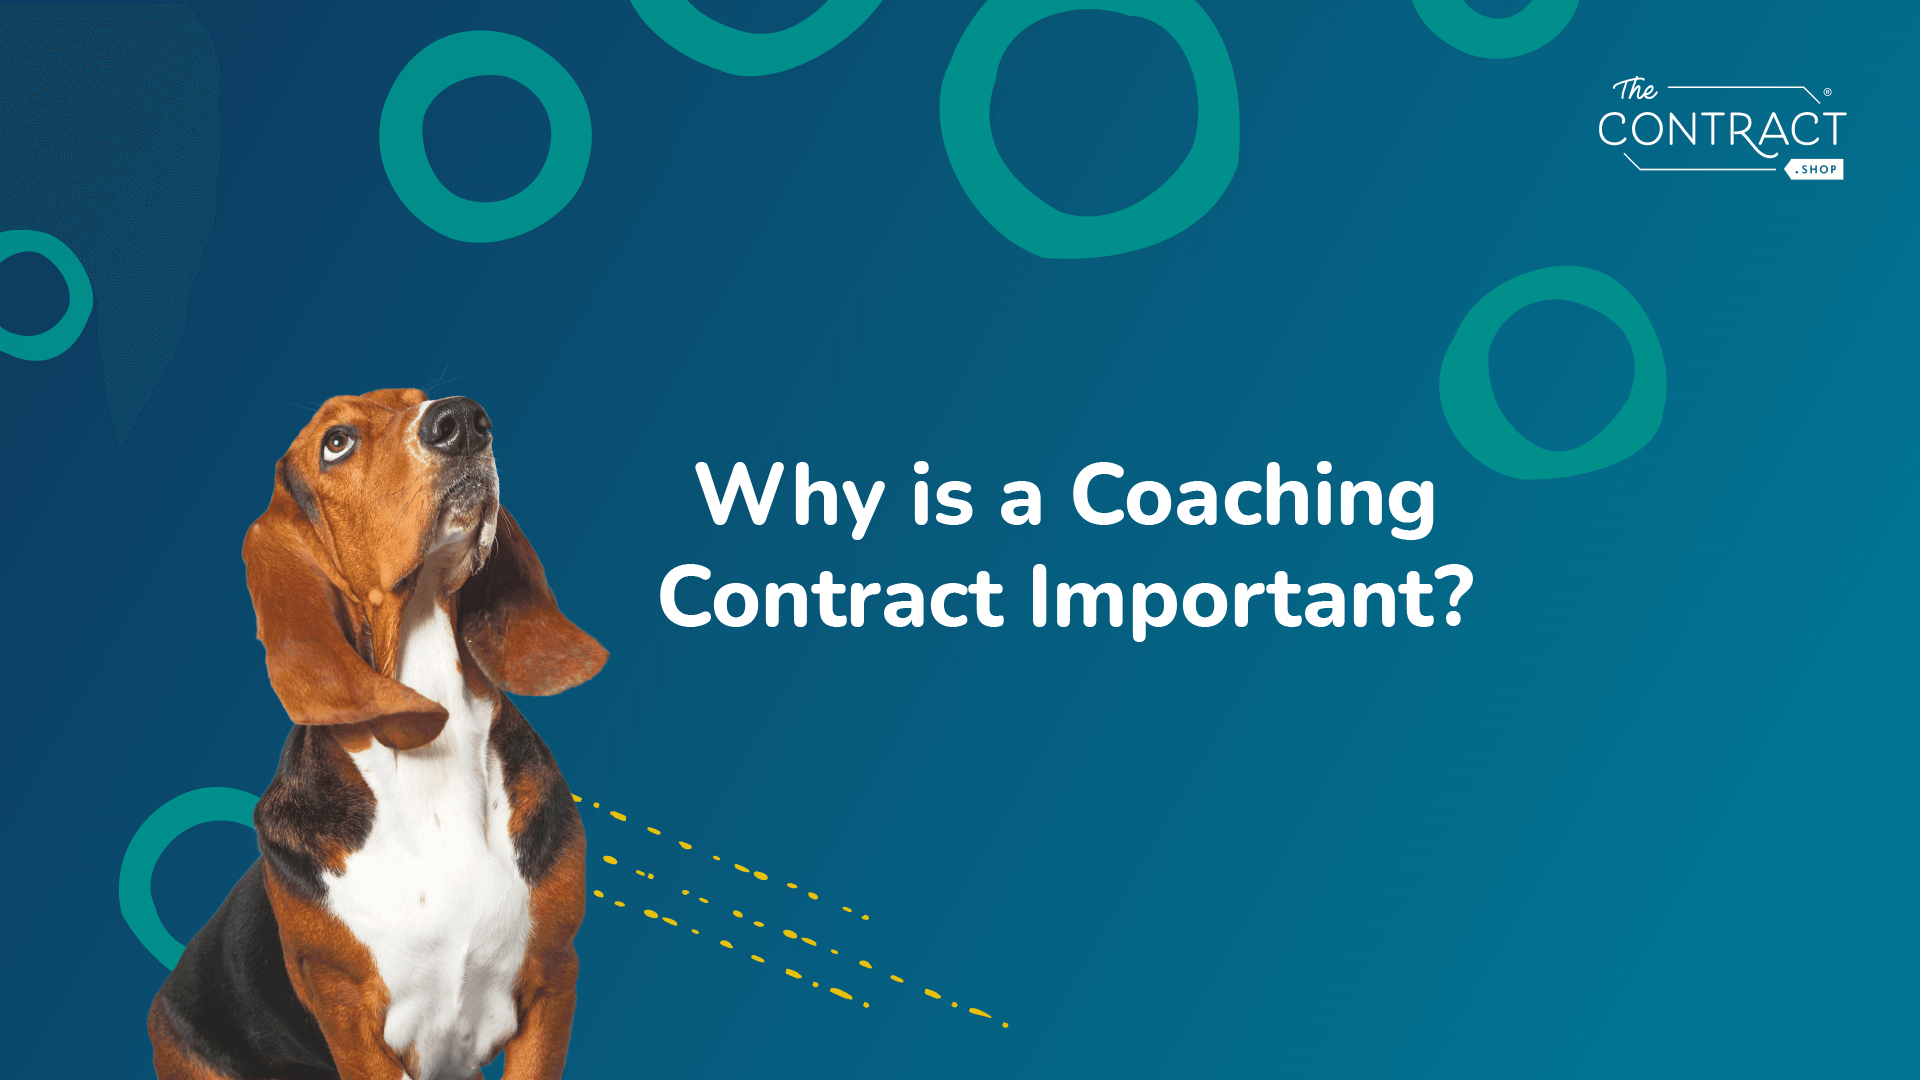 Why is a Coaching Contract Important?